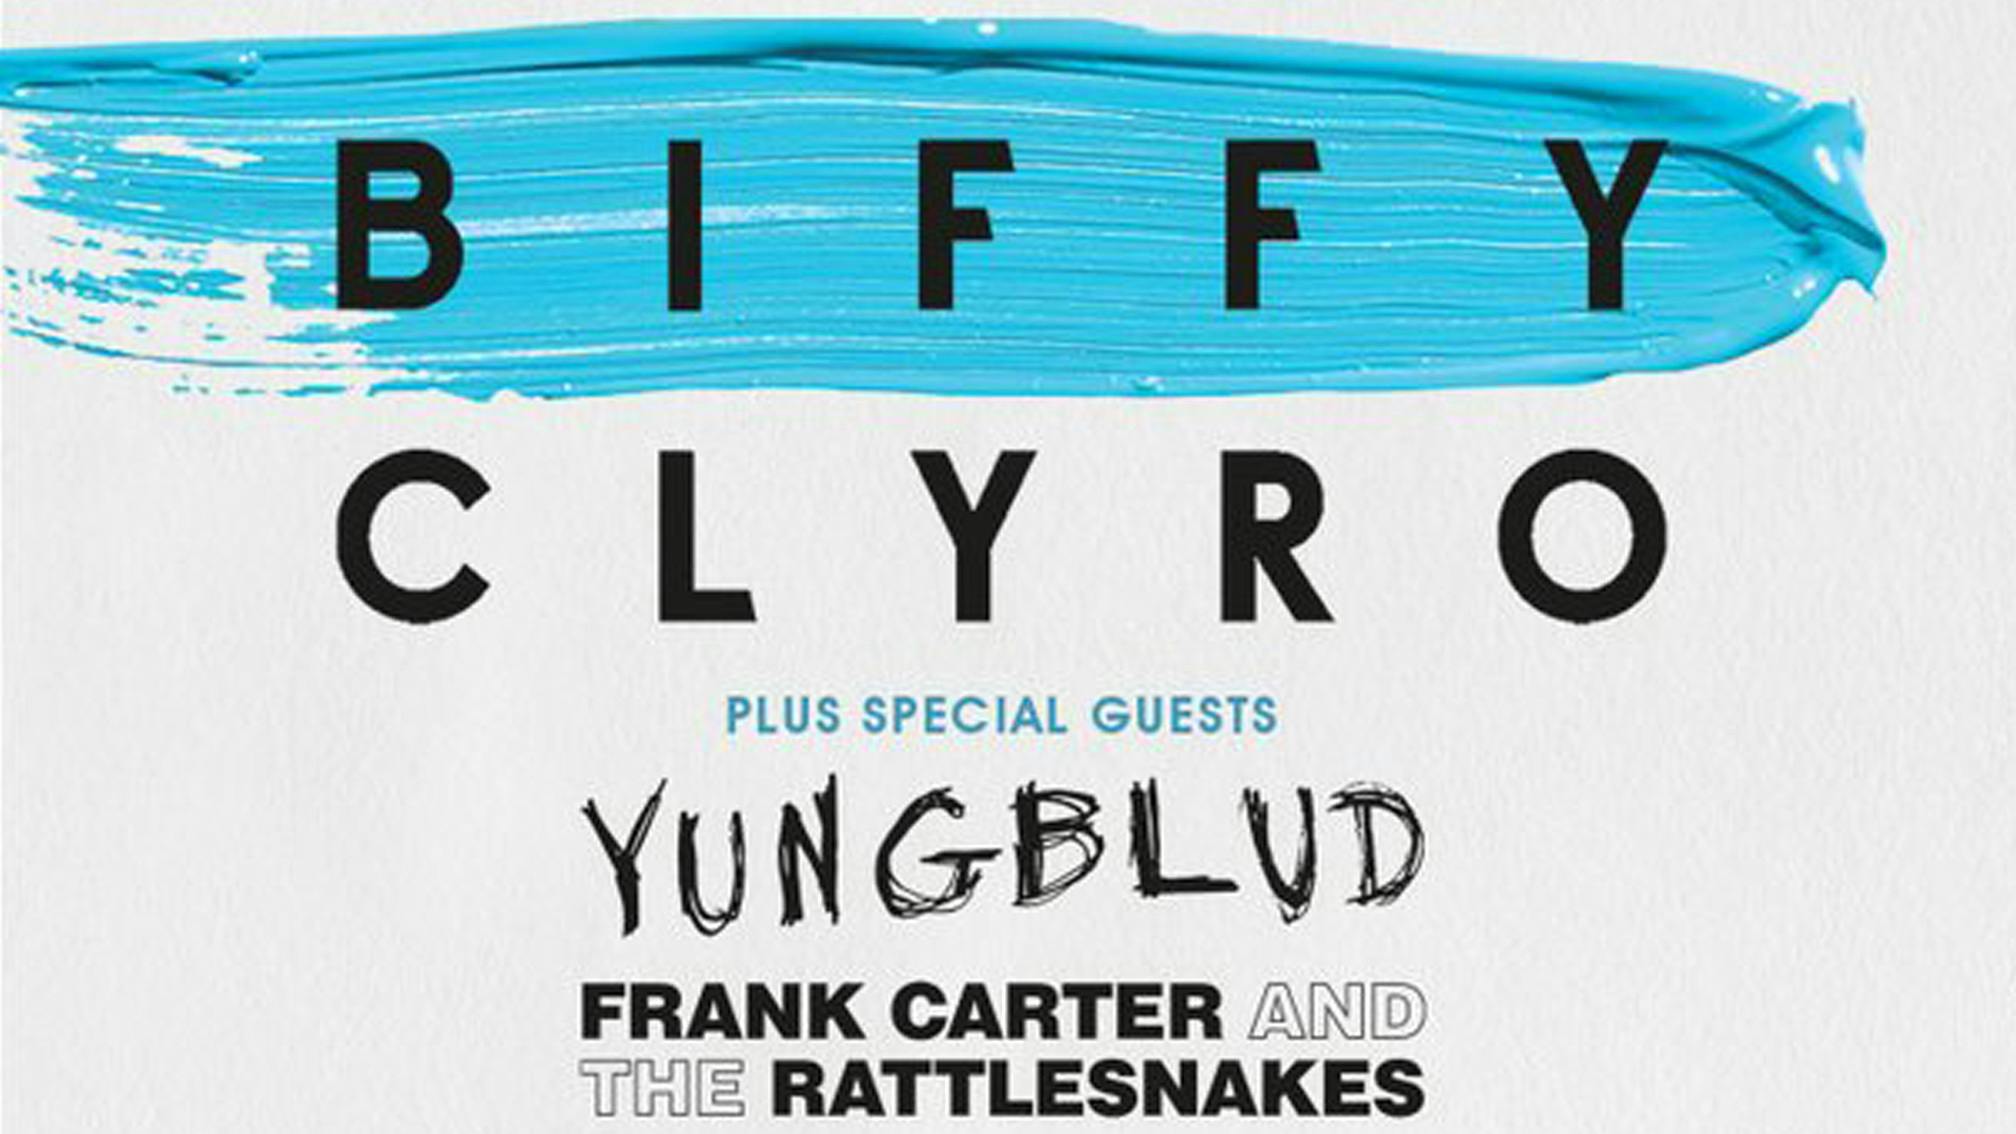 Biffy Clyro Announce Huge Headline Show With YUNGBLUD And Frank Carter & The Rattlesnakes